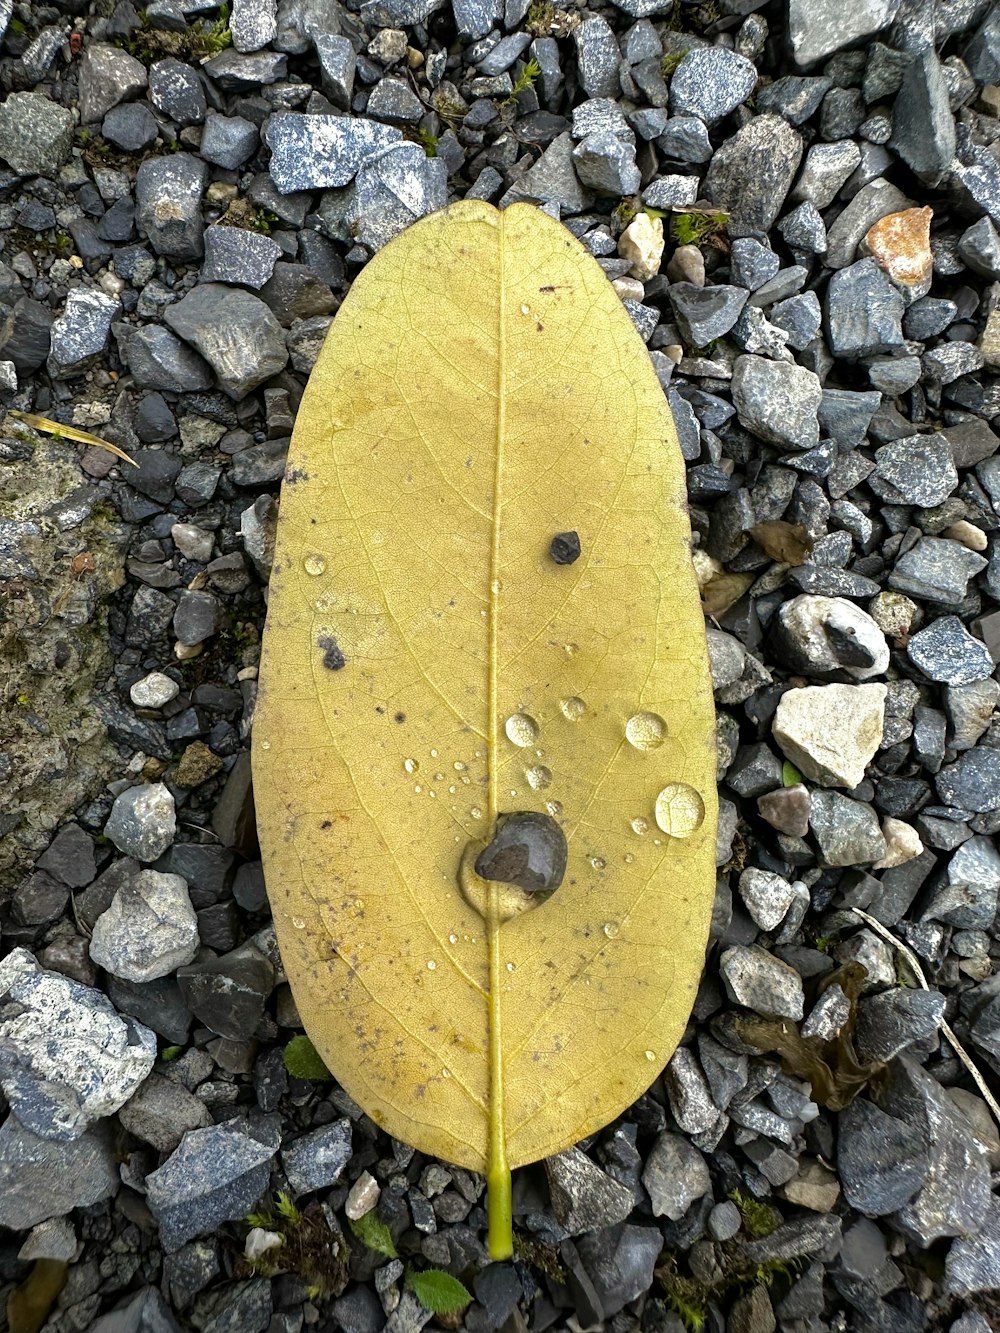 a yellow leaf on a rocky surface